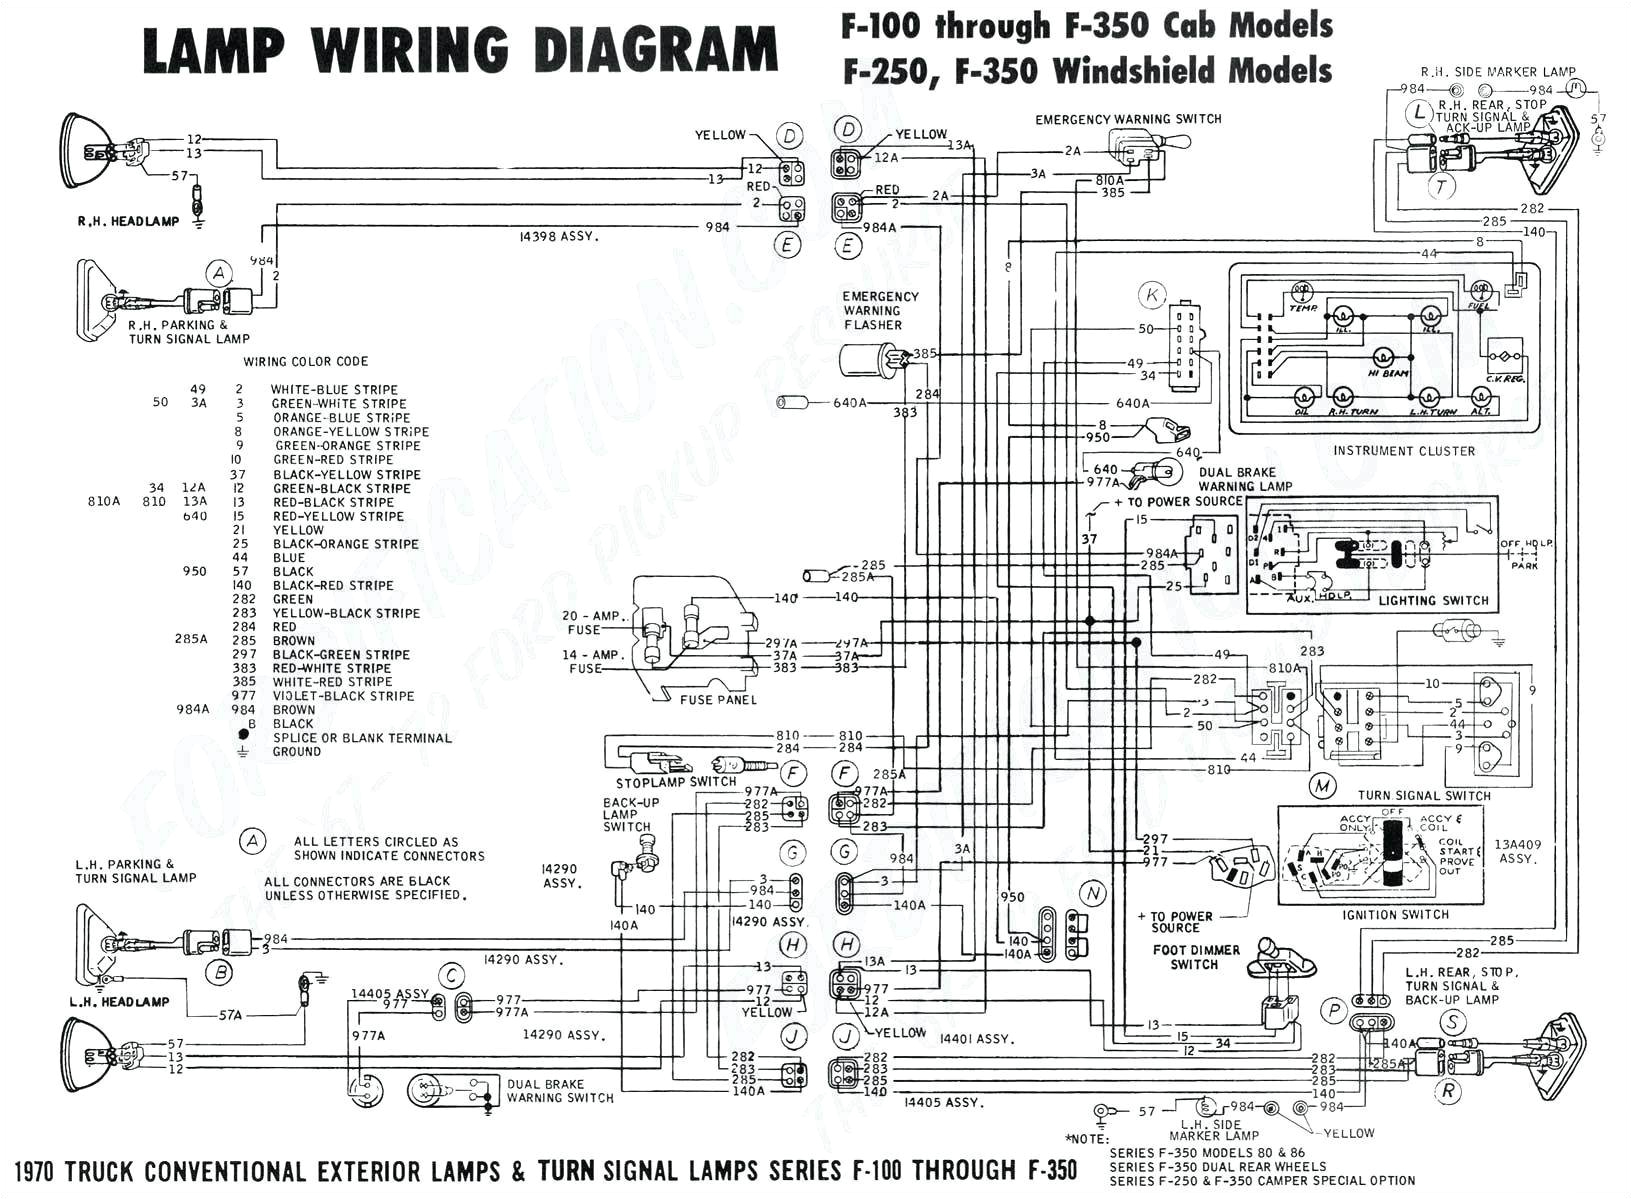 how to wire a fuse box diagram fresh 2003 dodge ram 1500 fuse box wiring diagram best 1999 dodge ram 1500 of how to wire a fuse box diagram png